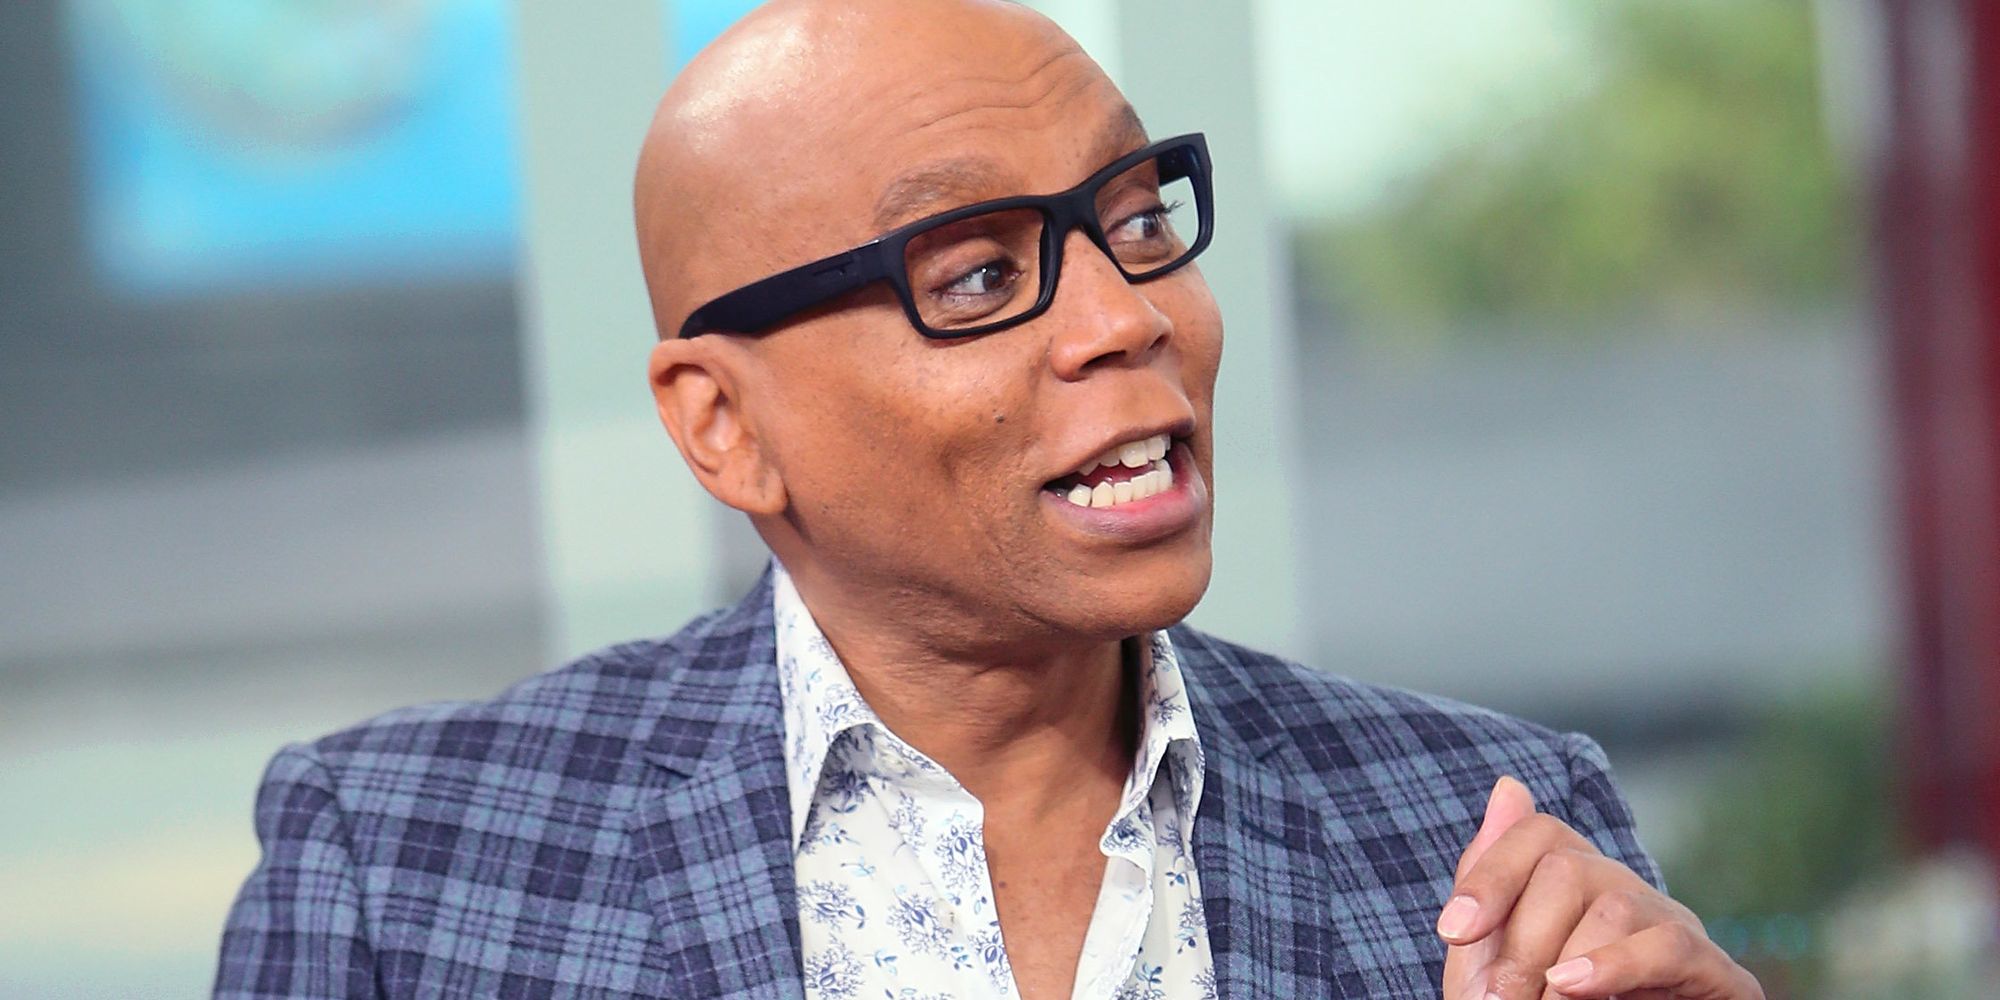 RuPaul Has Some Choice Words About Bachelorette Parties In Gay Bars - Huffington Post